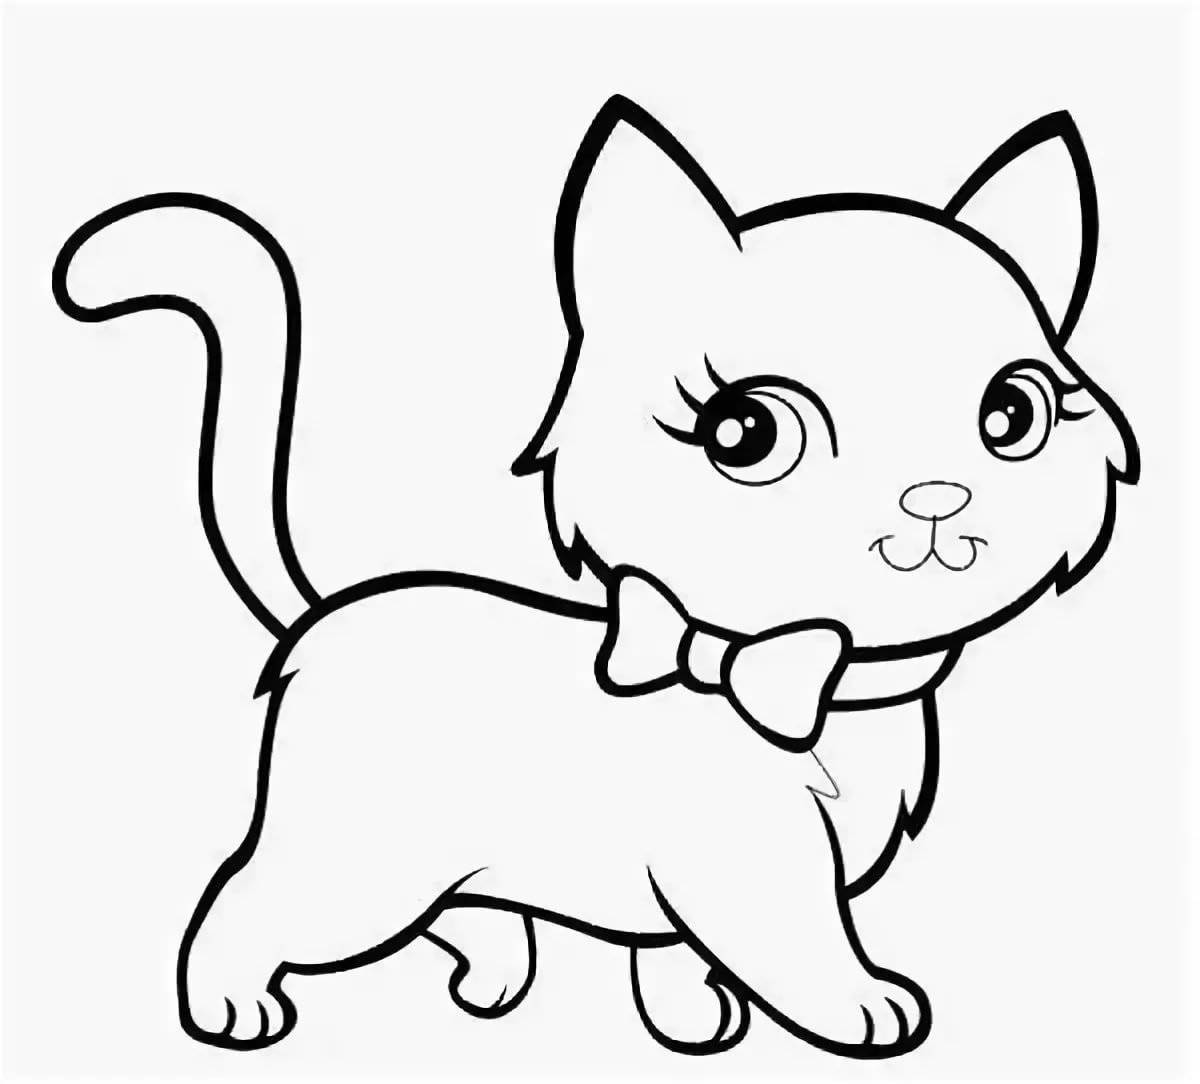 Coloring book funny kitten for children 4-5 years old